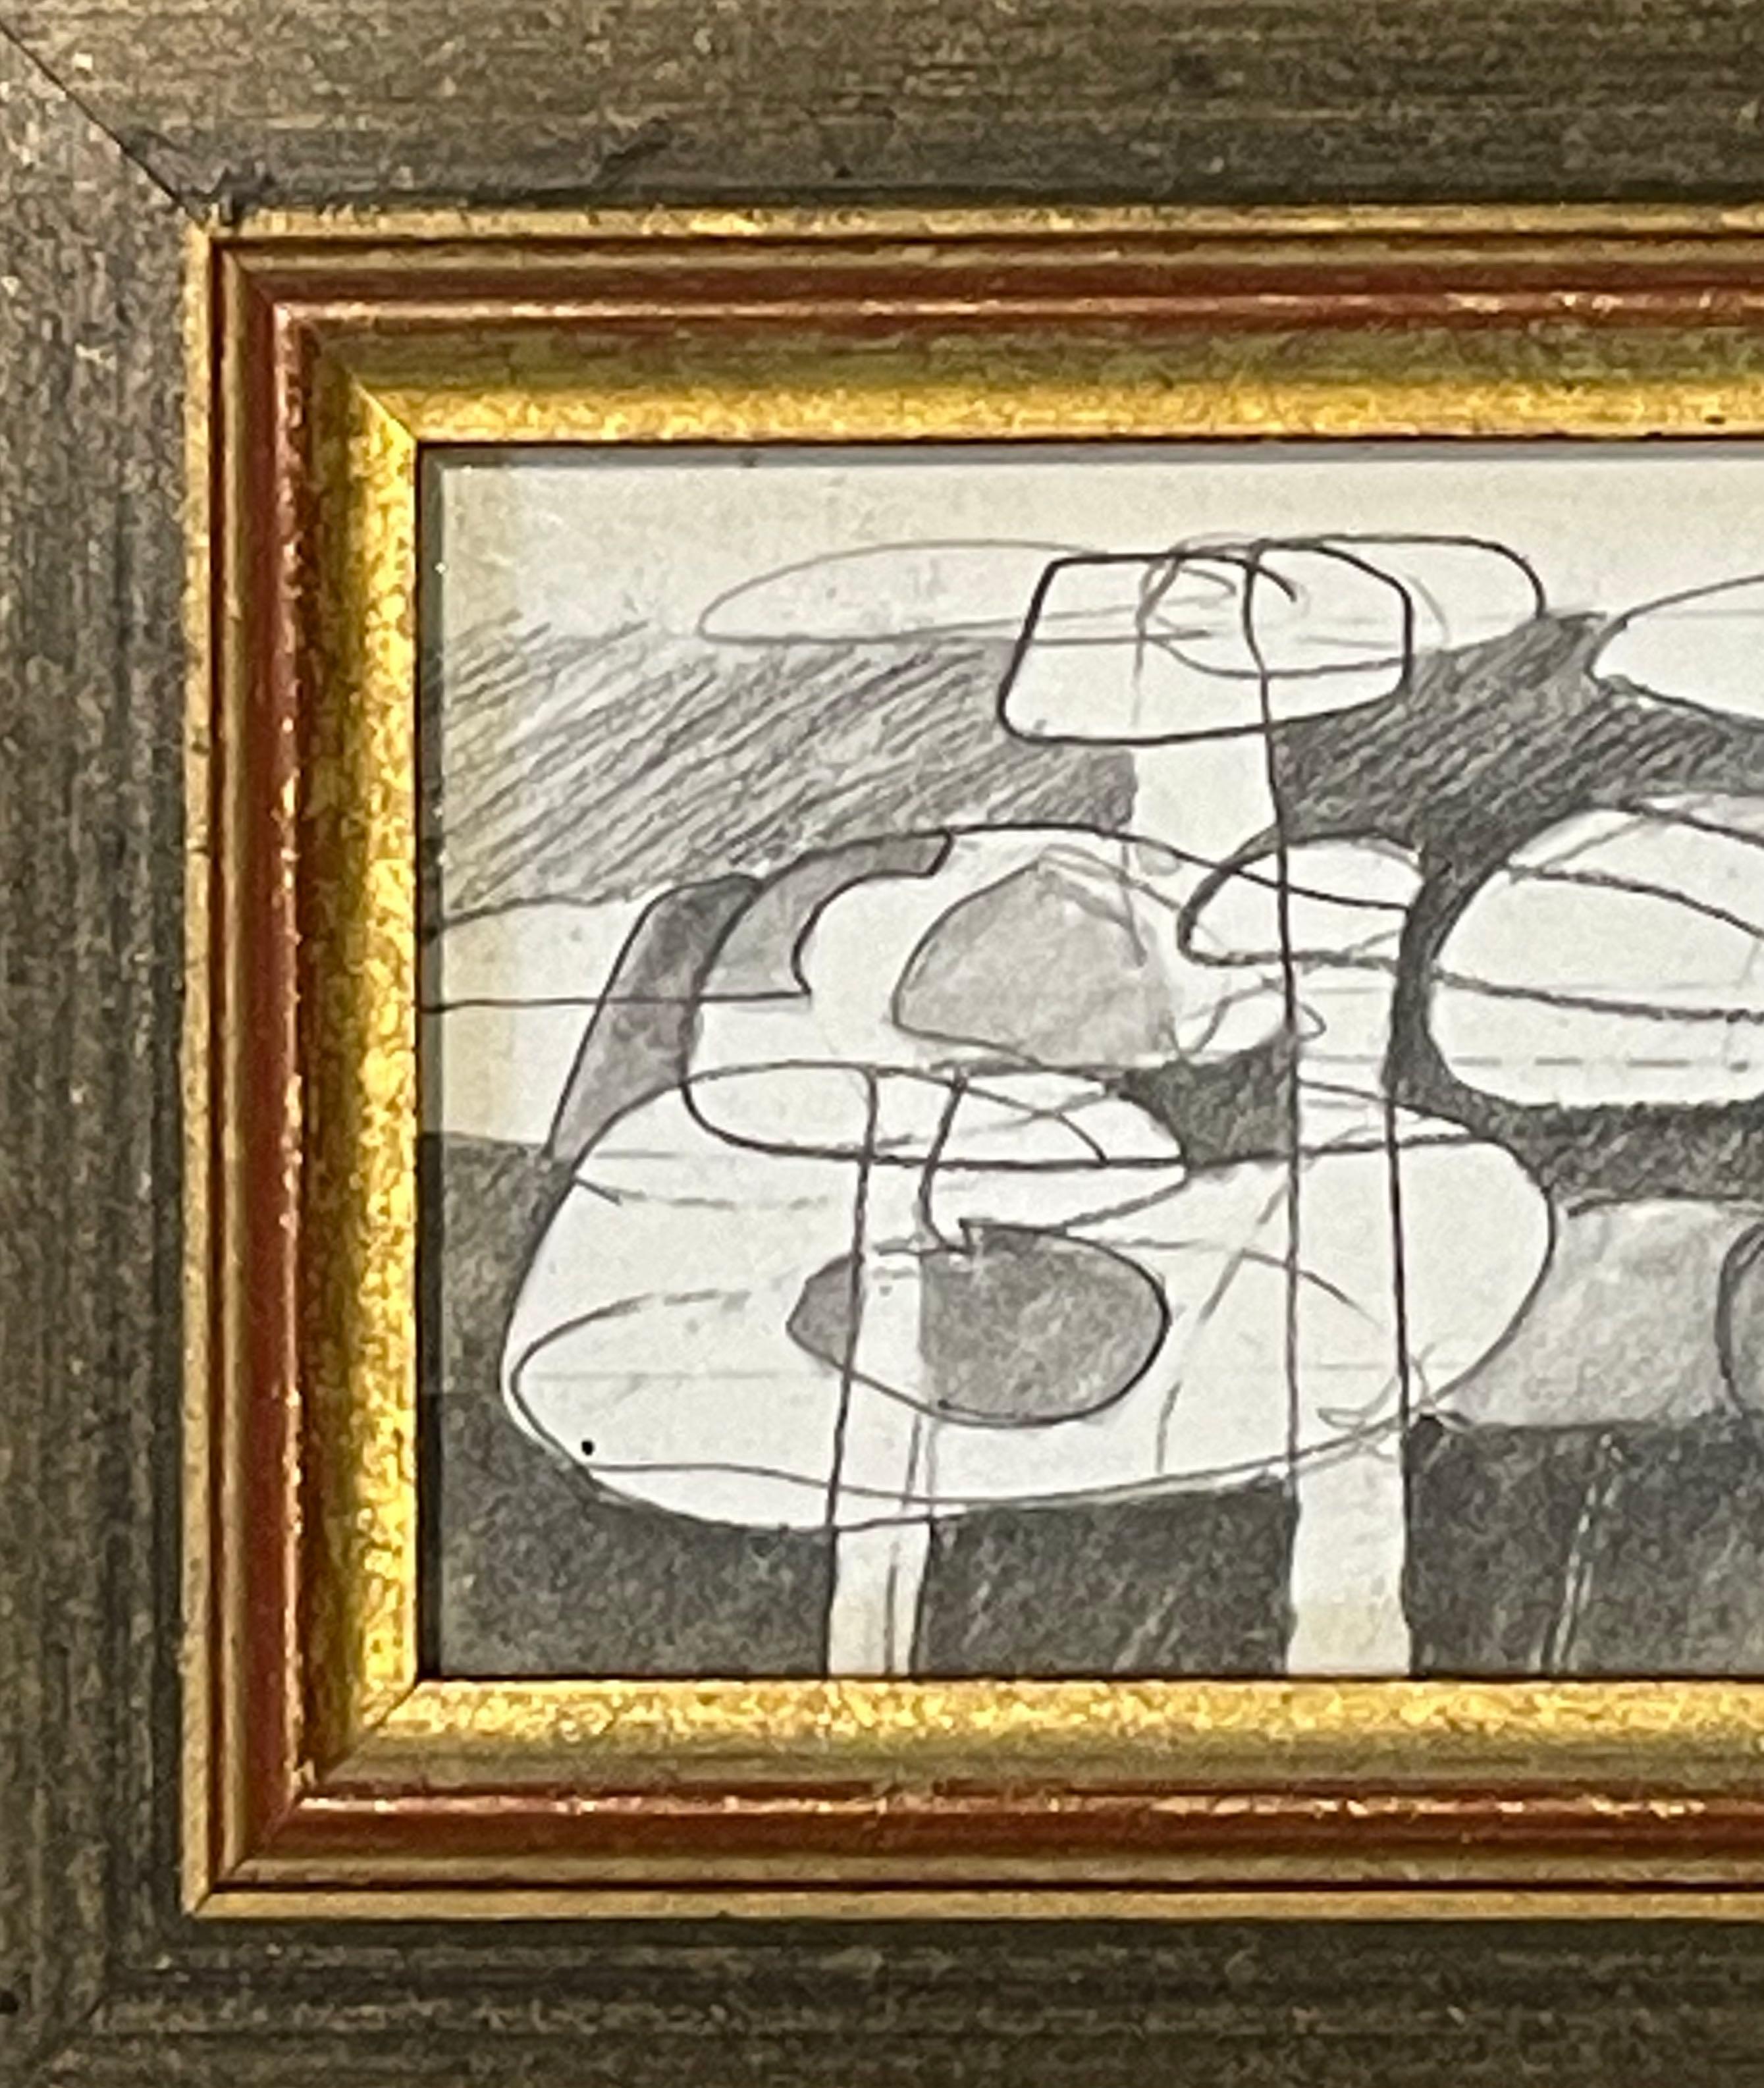 Original graphite drawing by American artist David Dew Bruner in 2015.
A study of water lilies.
Inspired by the artist Graham Sutherland.
This is one of many pieces from a large body of works.
Vintage weathered wood frame with red and gold